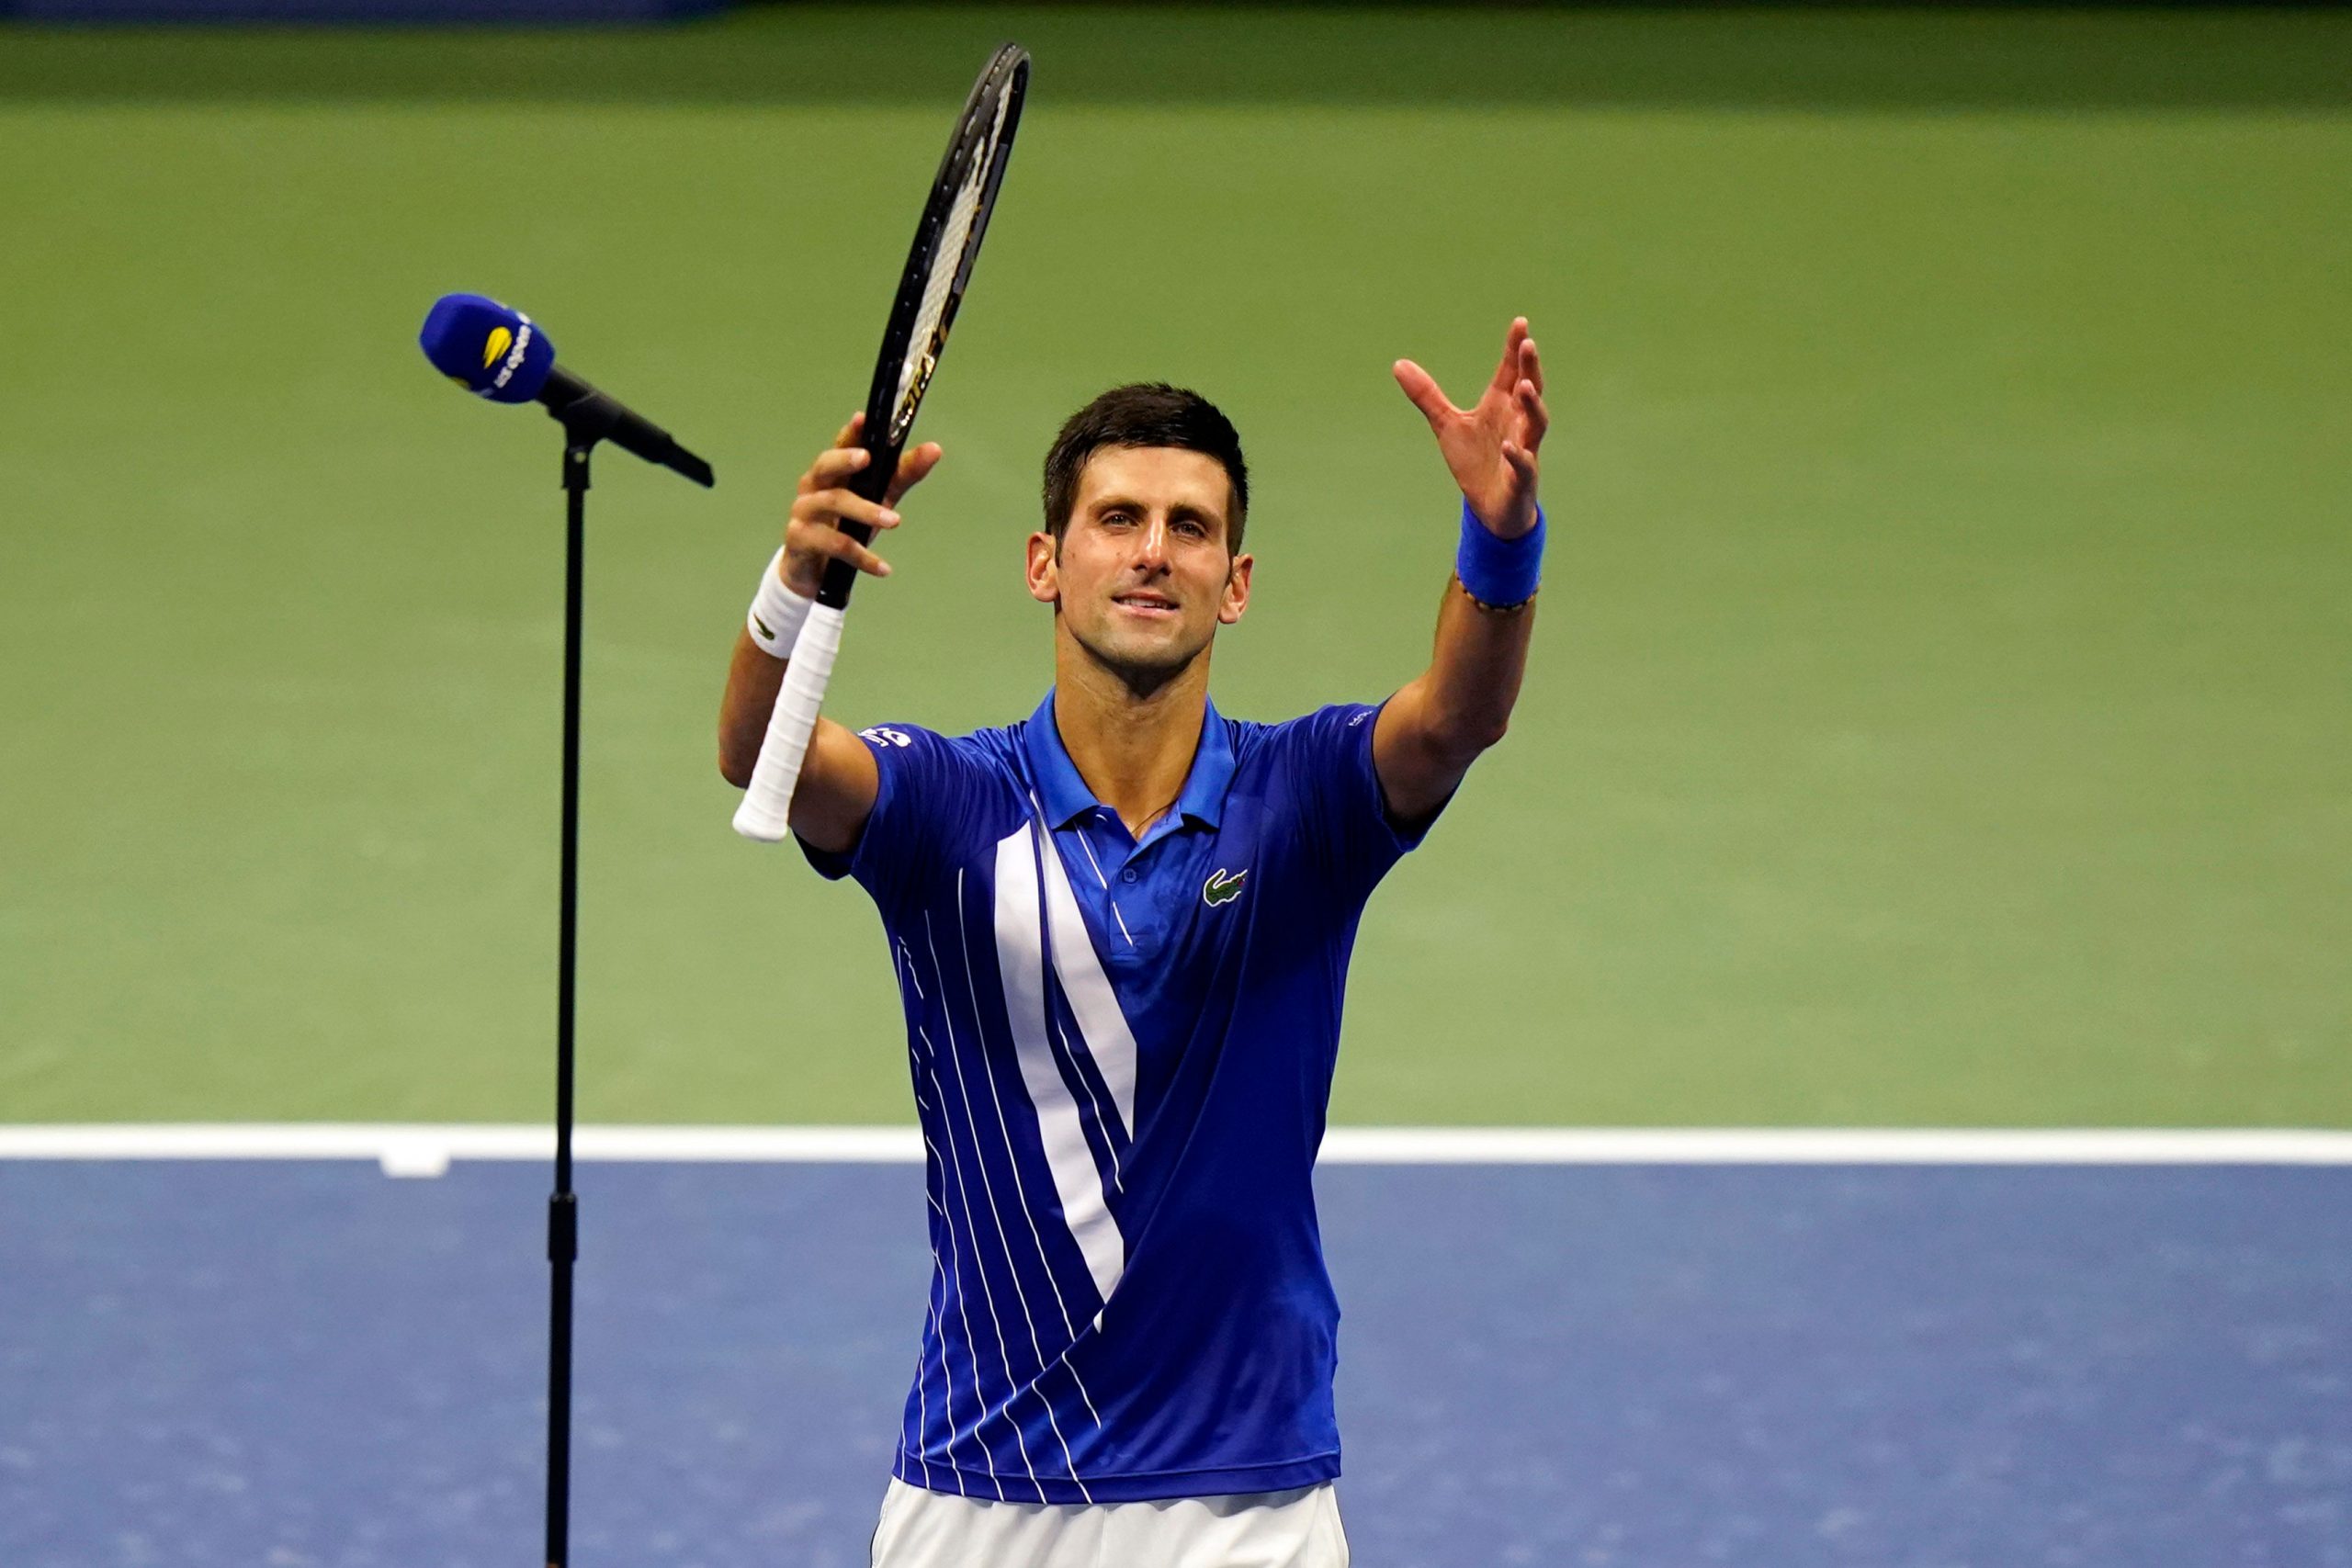 ‘Simply incredible’ as Djokovic equals Sampras’ year-end world number one record